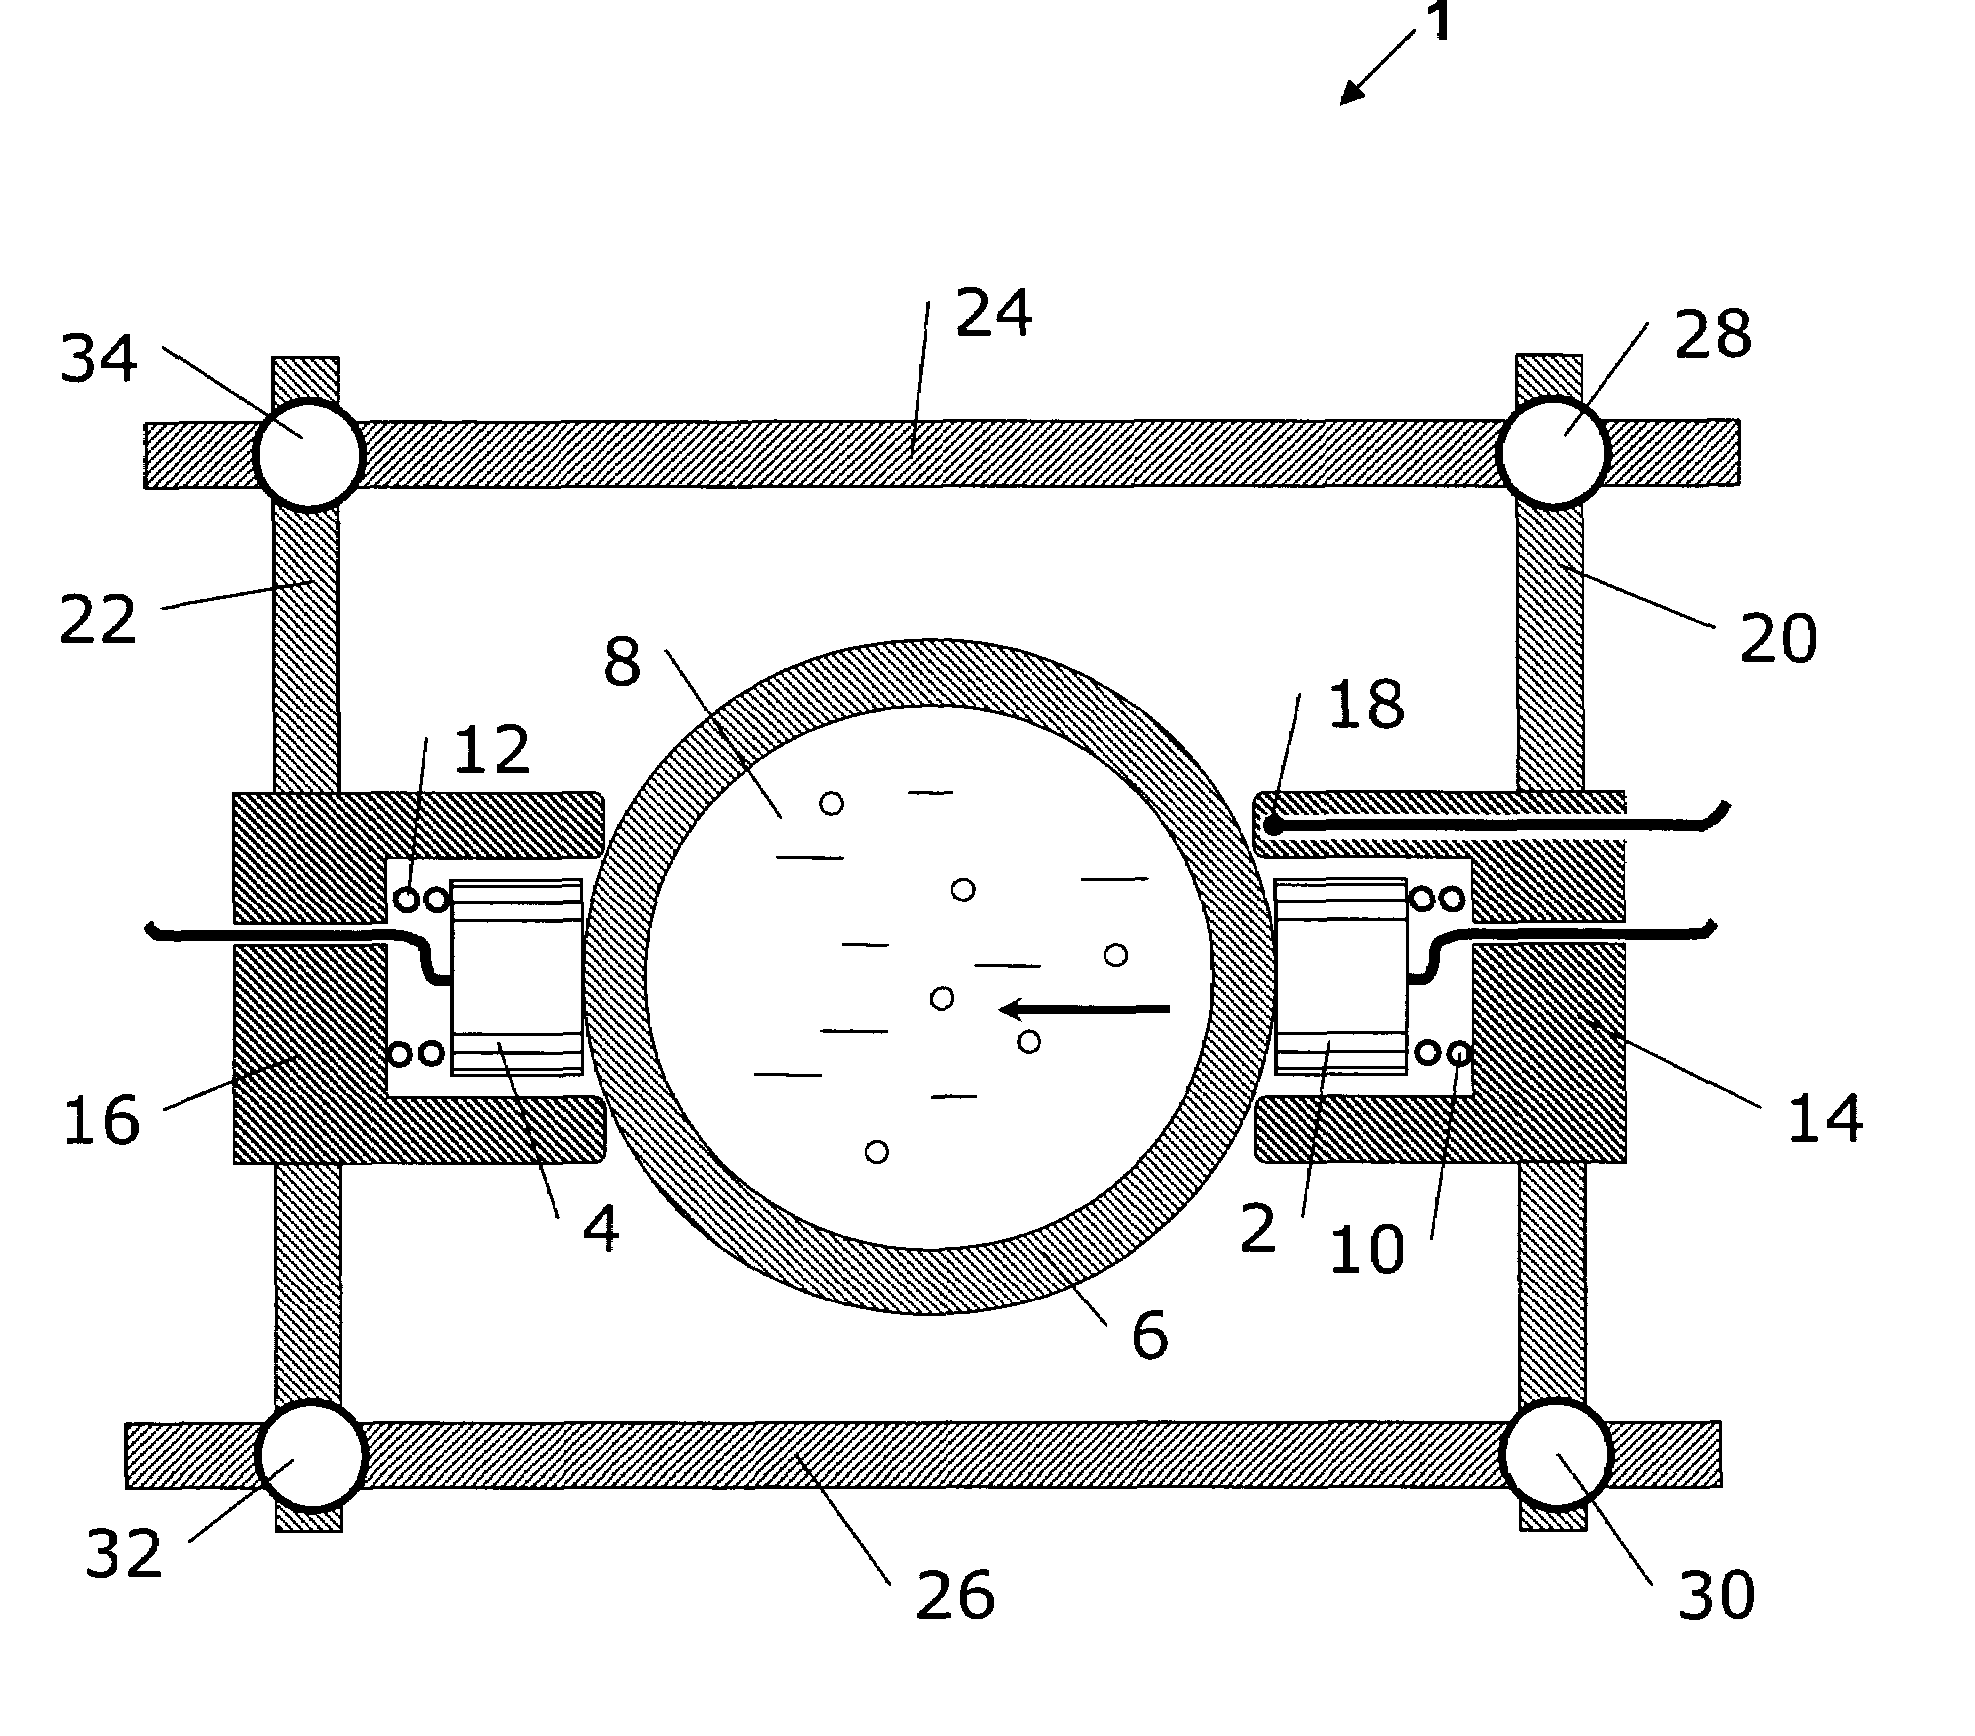 Ultrasonic monitor of material composition and particle size